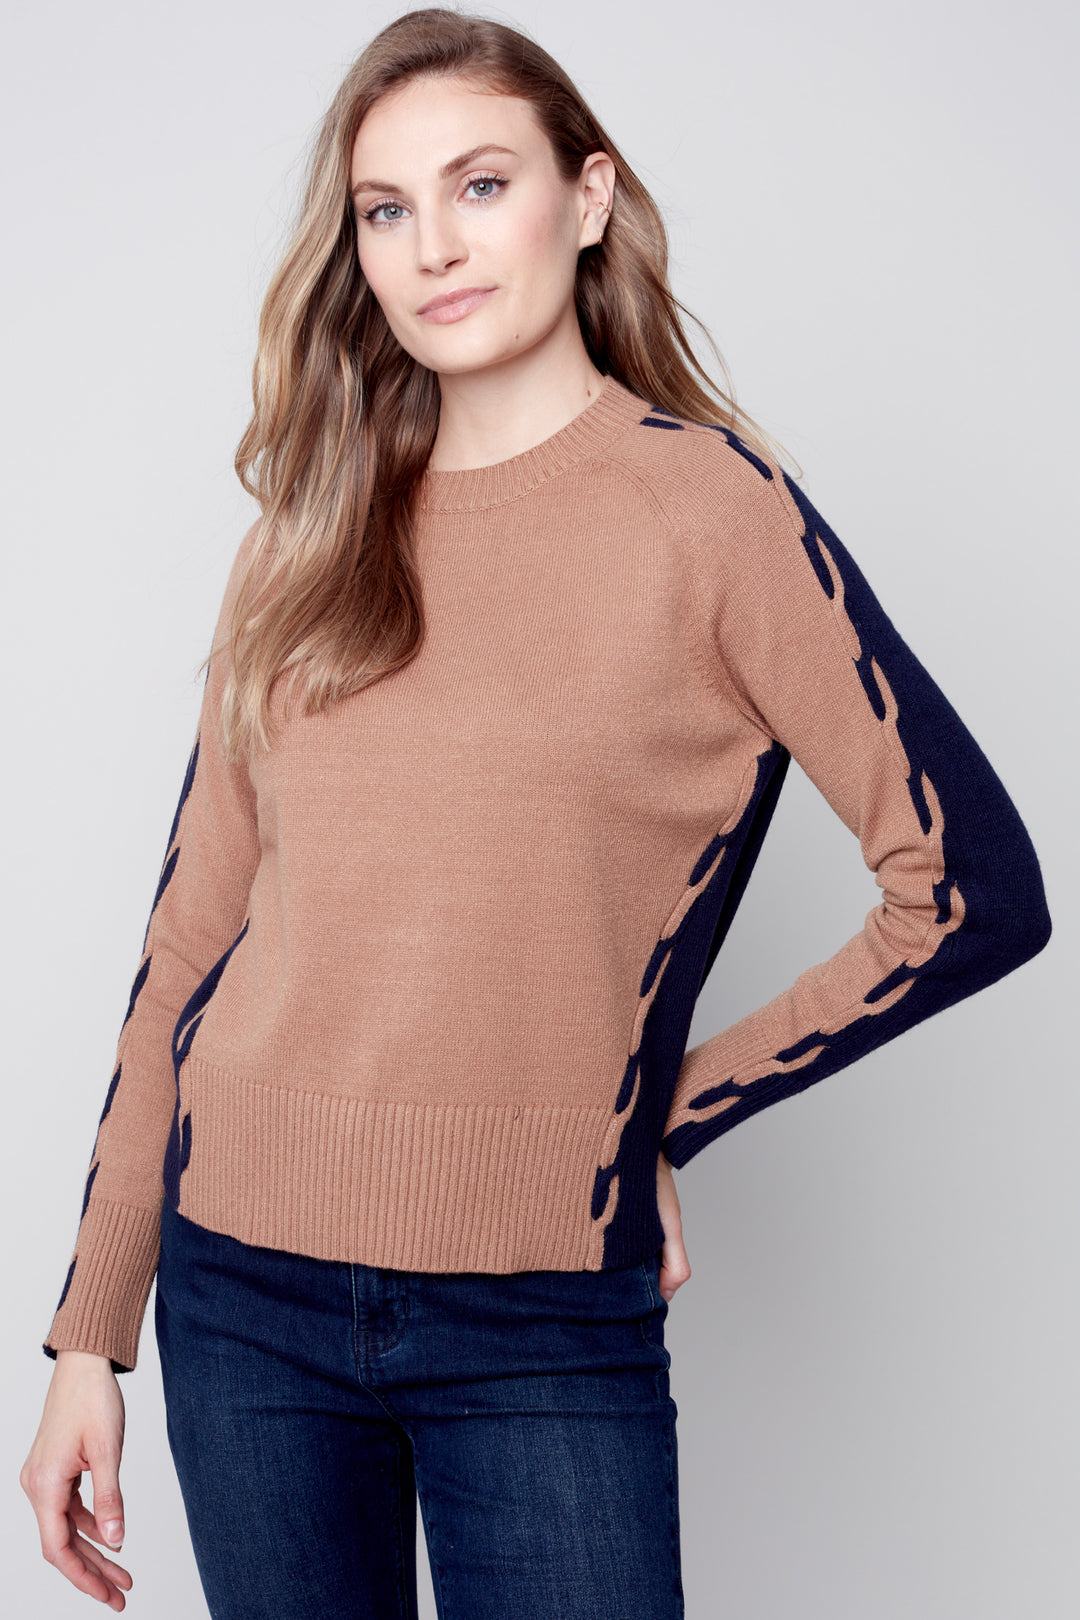 Stay warm and stylish with this plushy colour block knit sweater, featuring eye-catching cable detailing on the sleeves. 